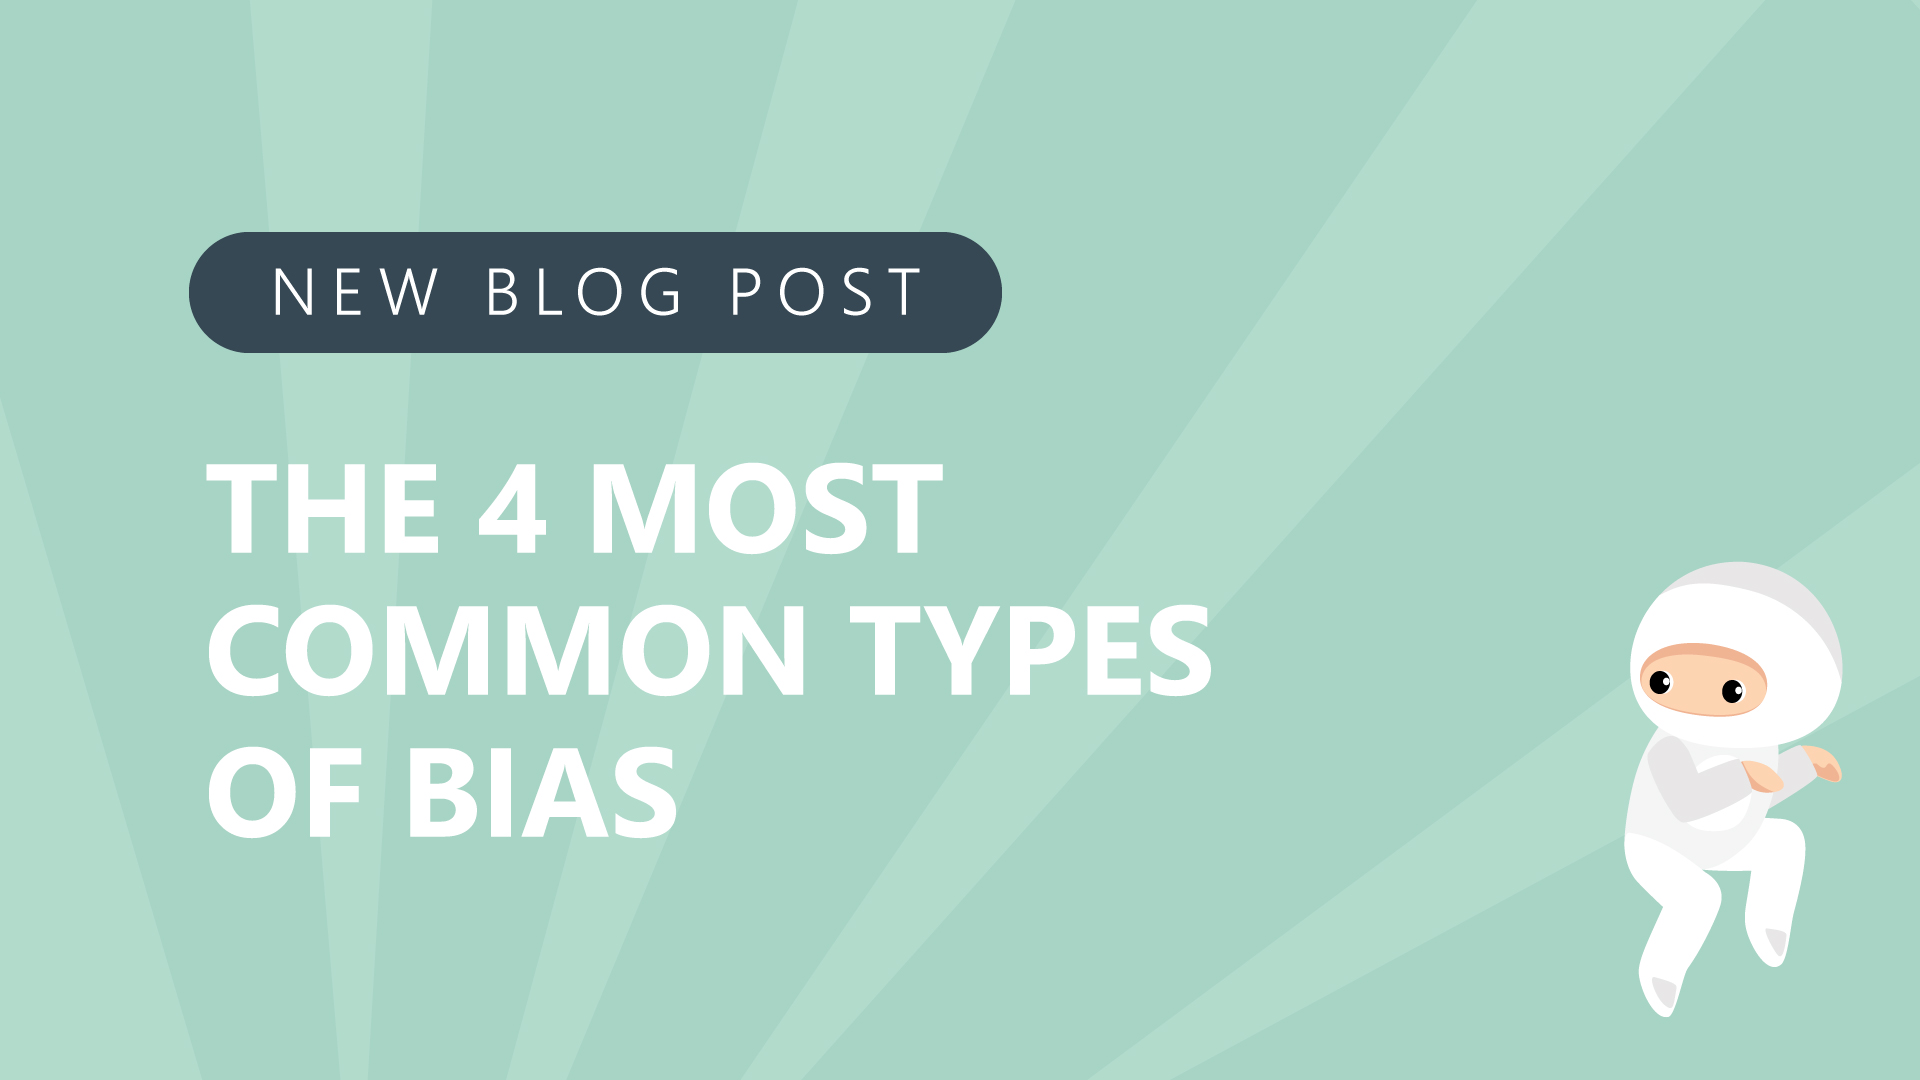 47-The-4-Most-Common-Types-of-Bias.jpg